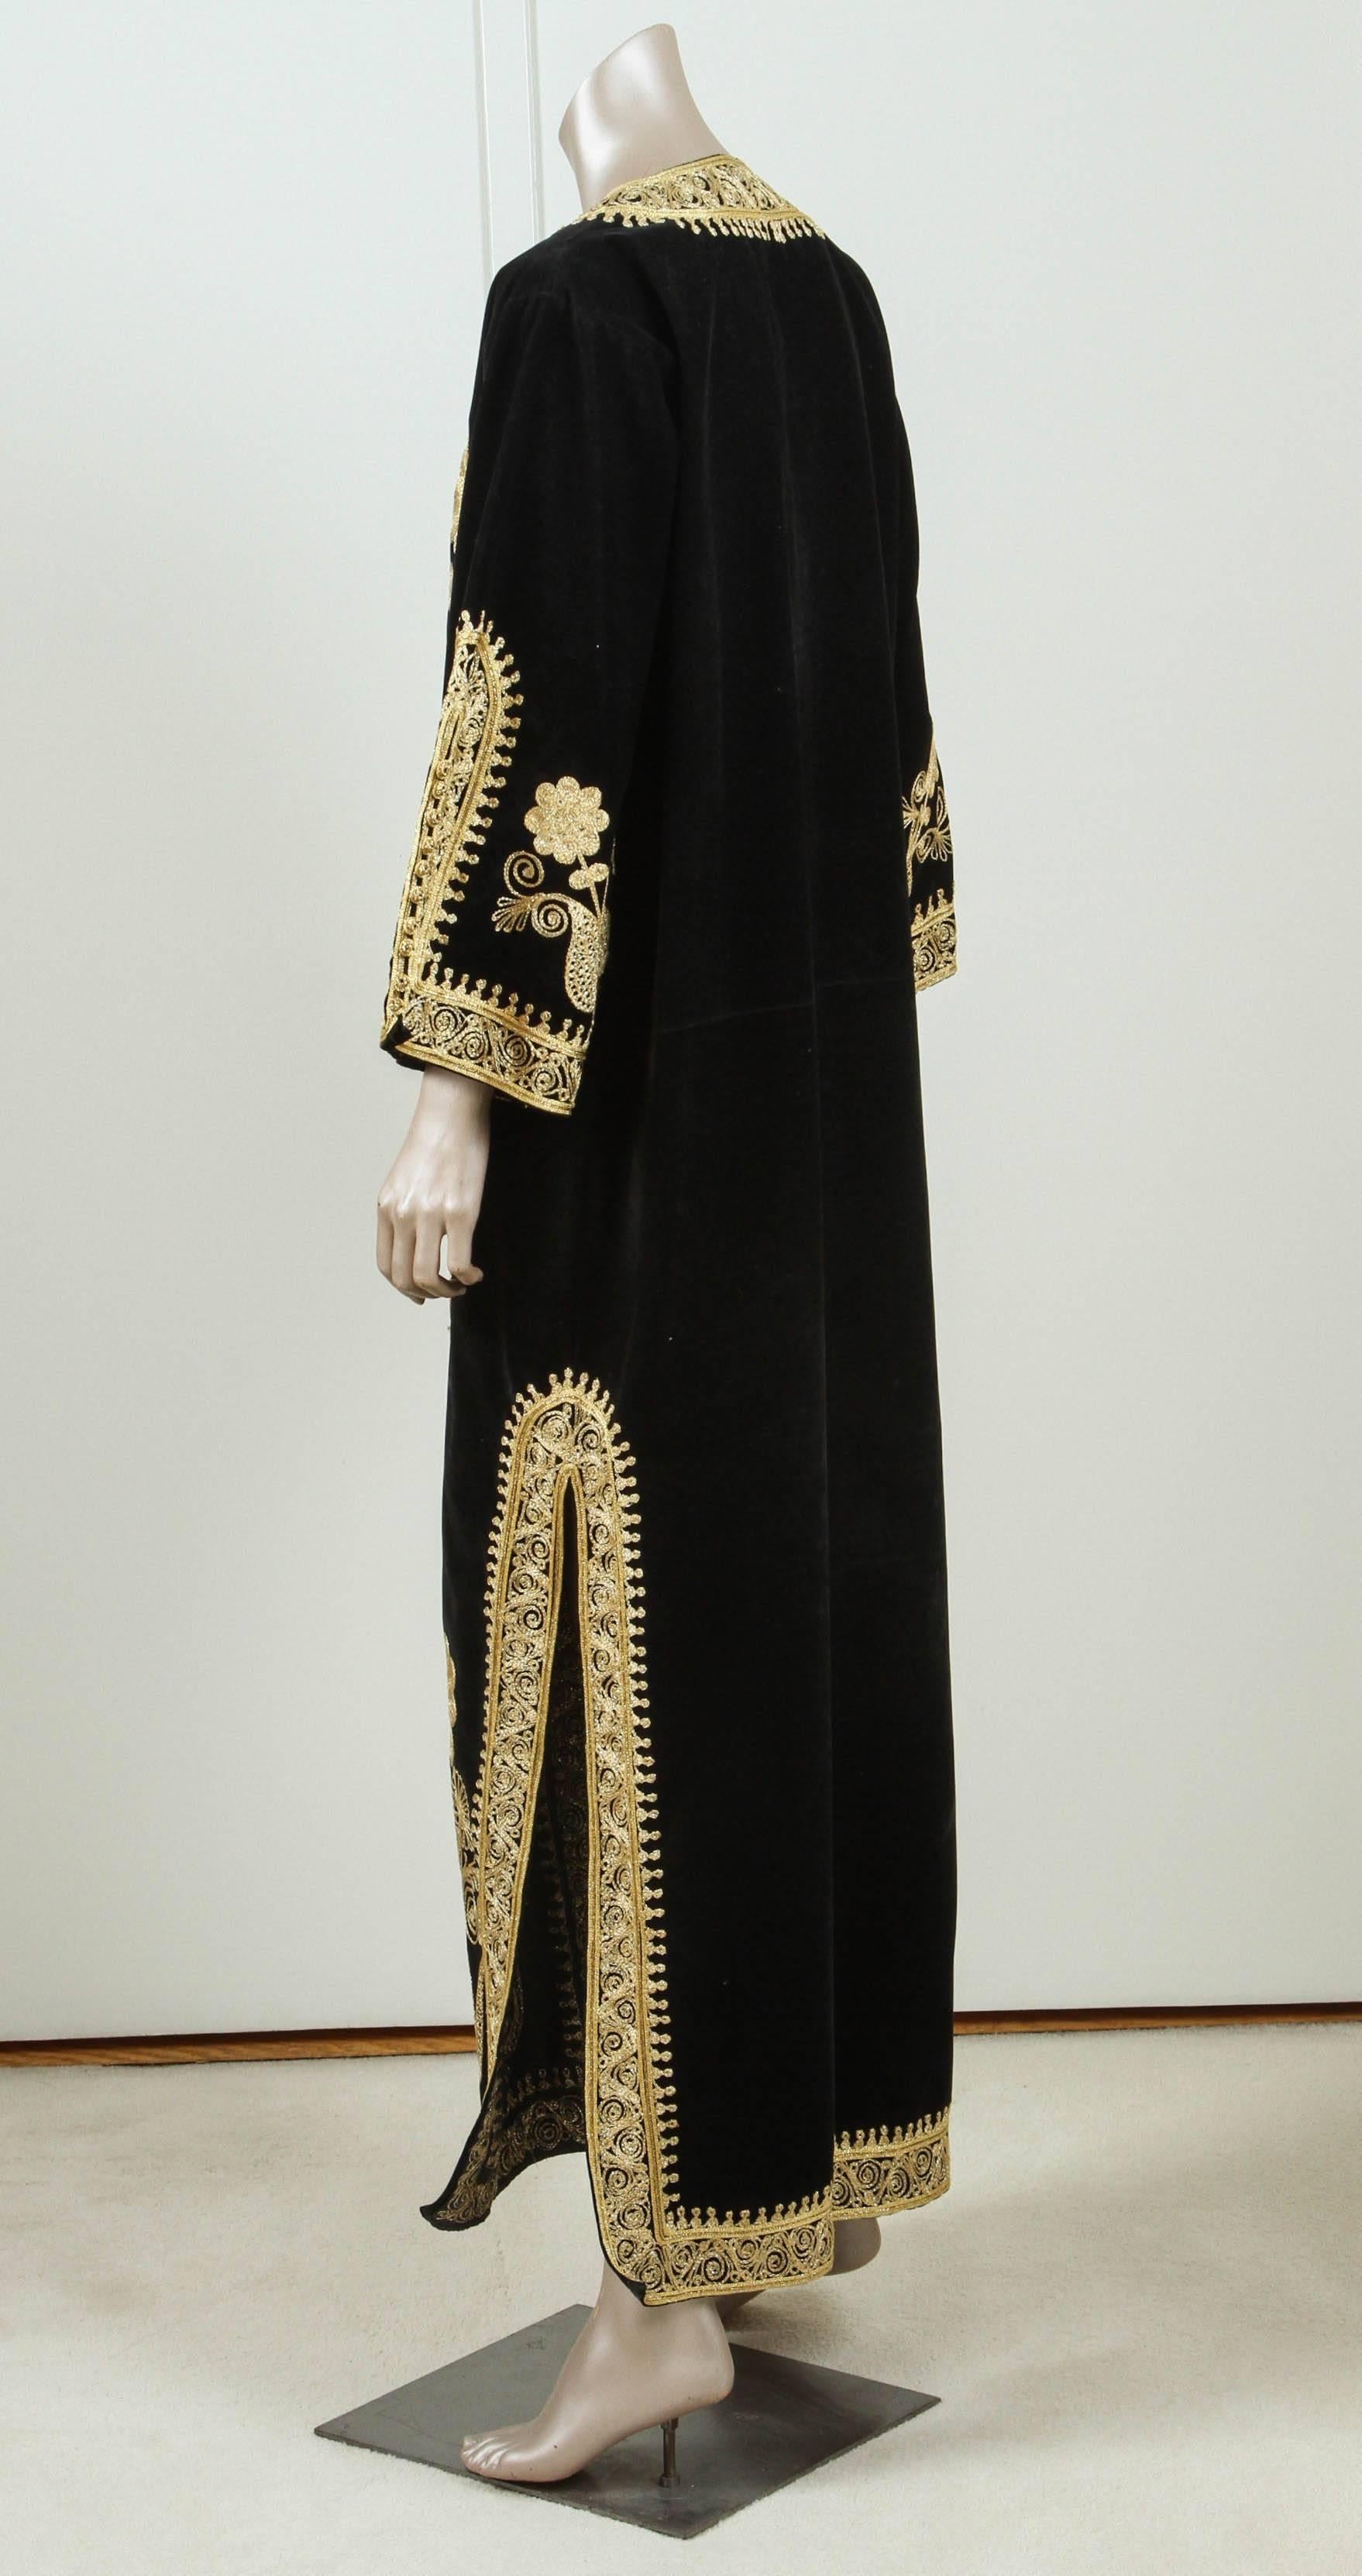 20th Century Moroccan Caftan, Black Kaftan Embroidered with Gold